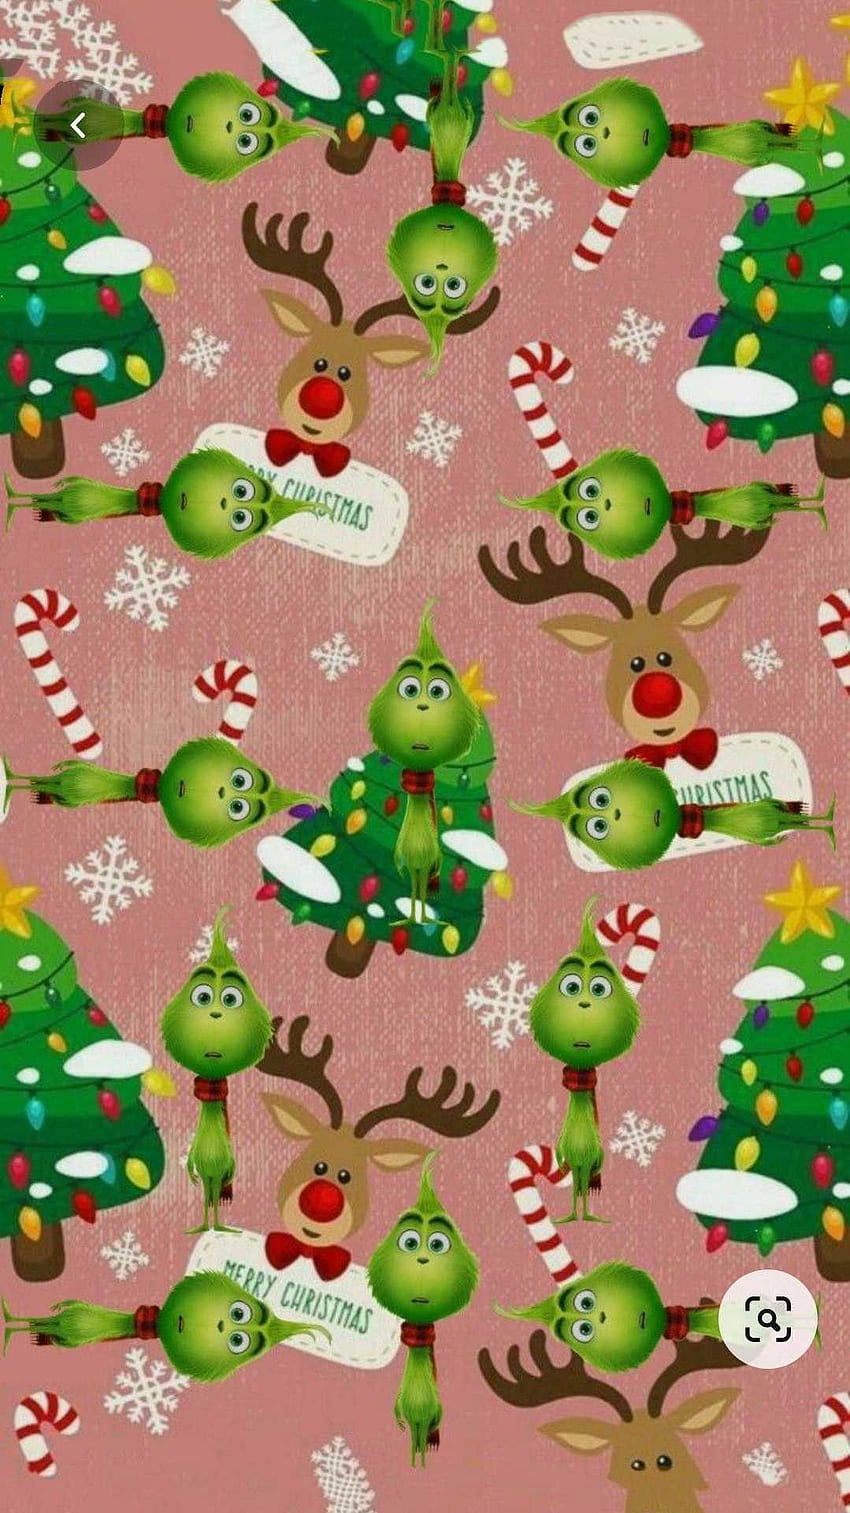 HD wallpaper how the grinch stole christmas pictures to download animal   Wallpaper Flare